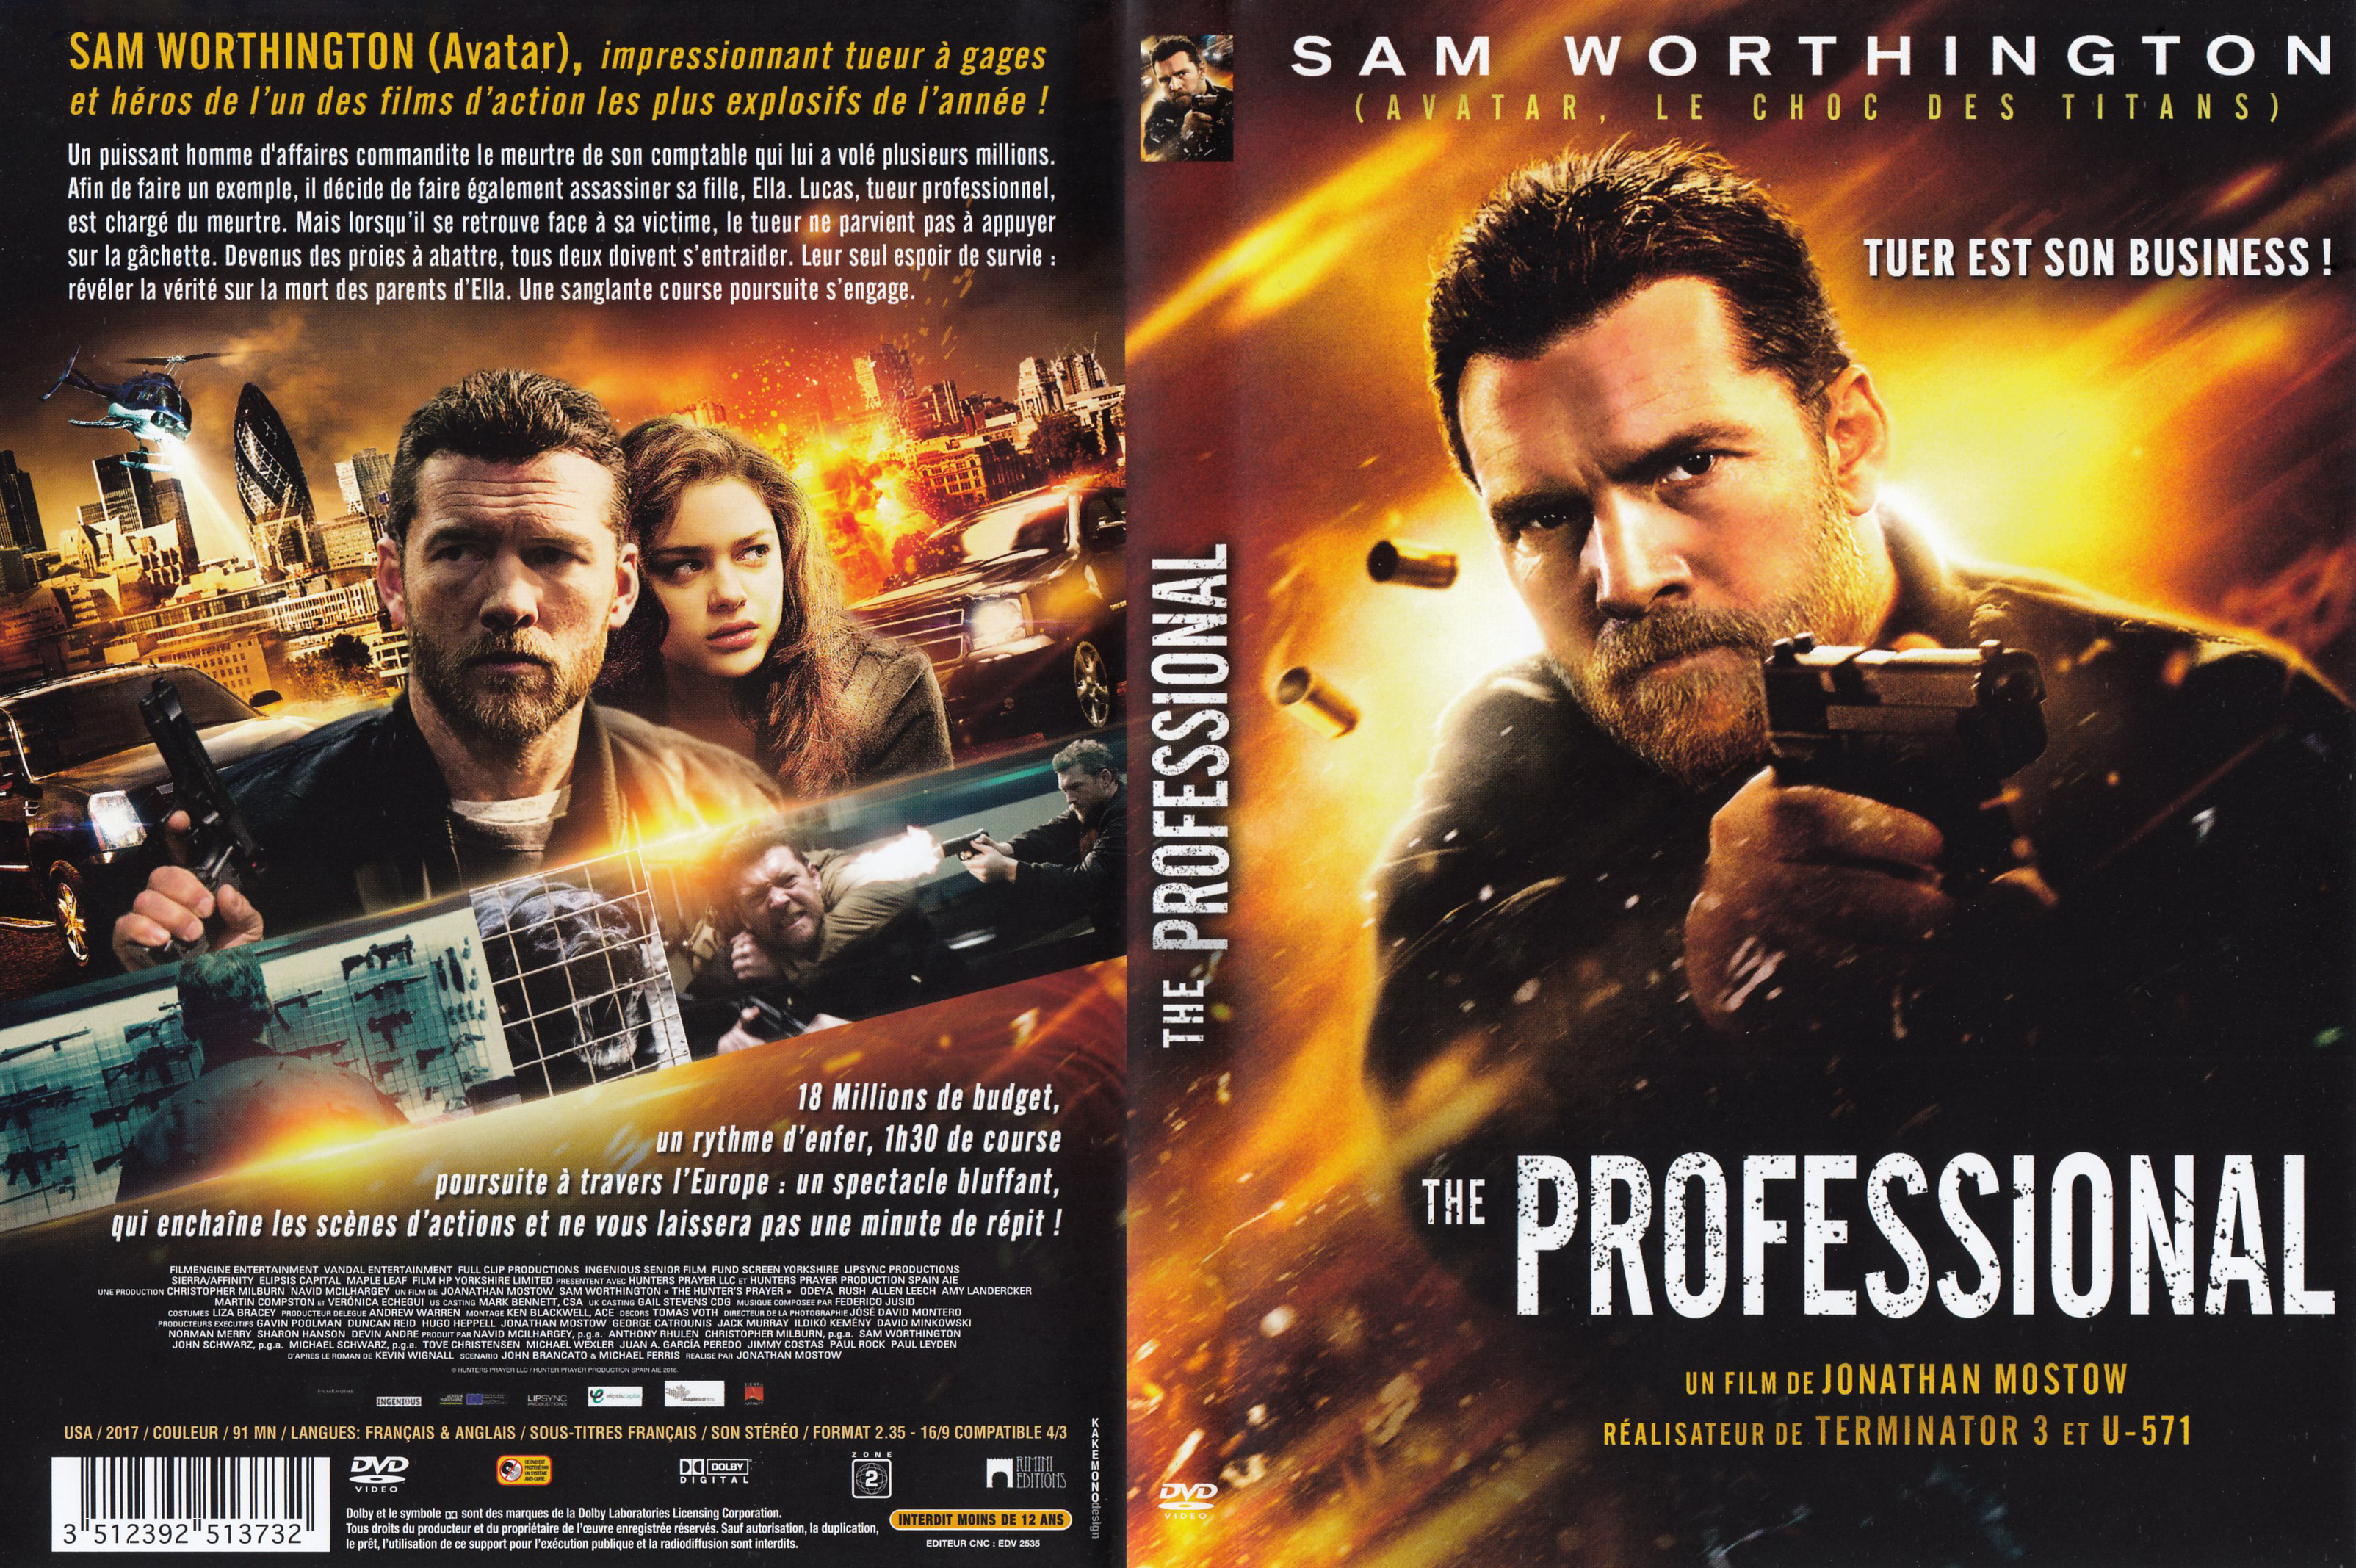 Jaquette DVD The professional (2017)